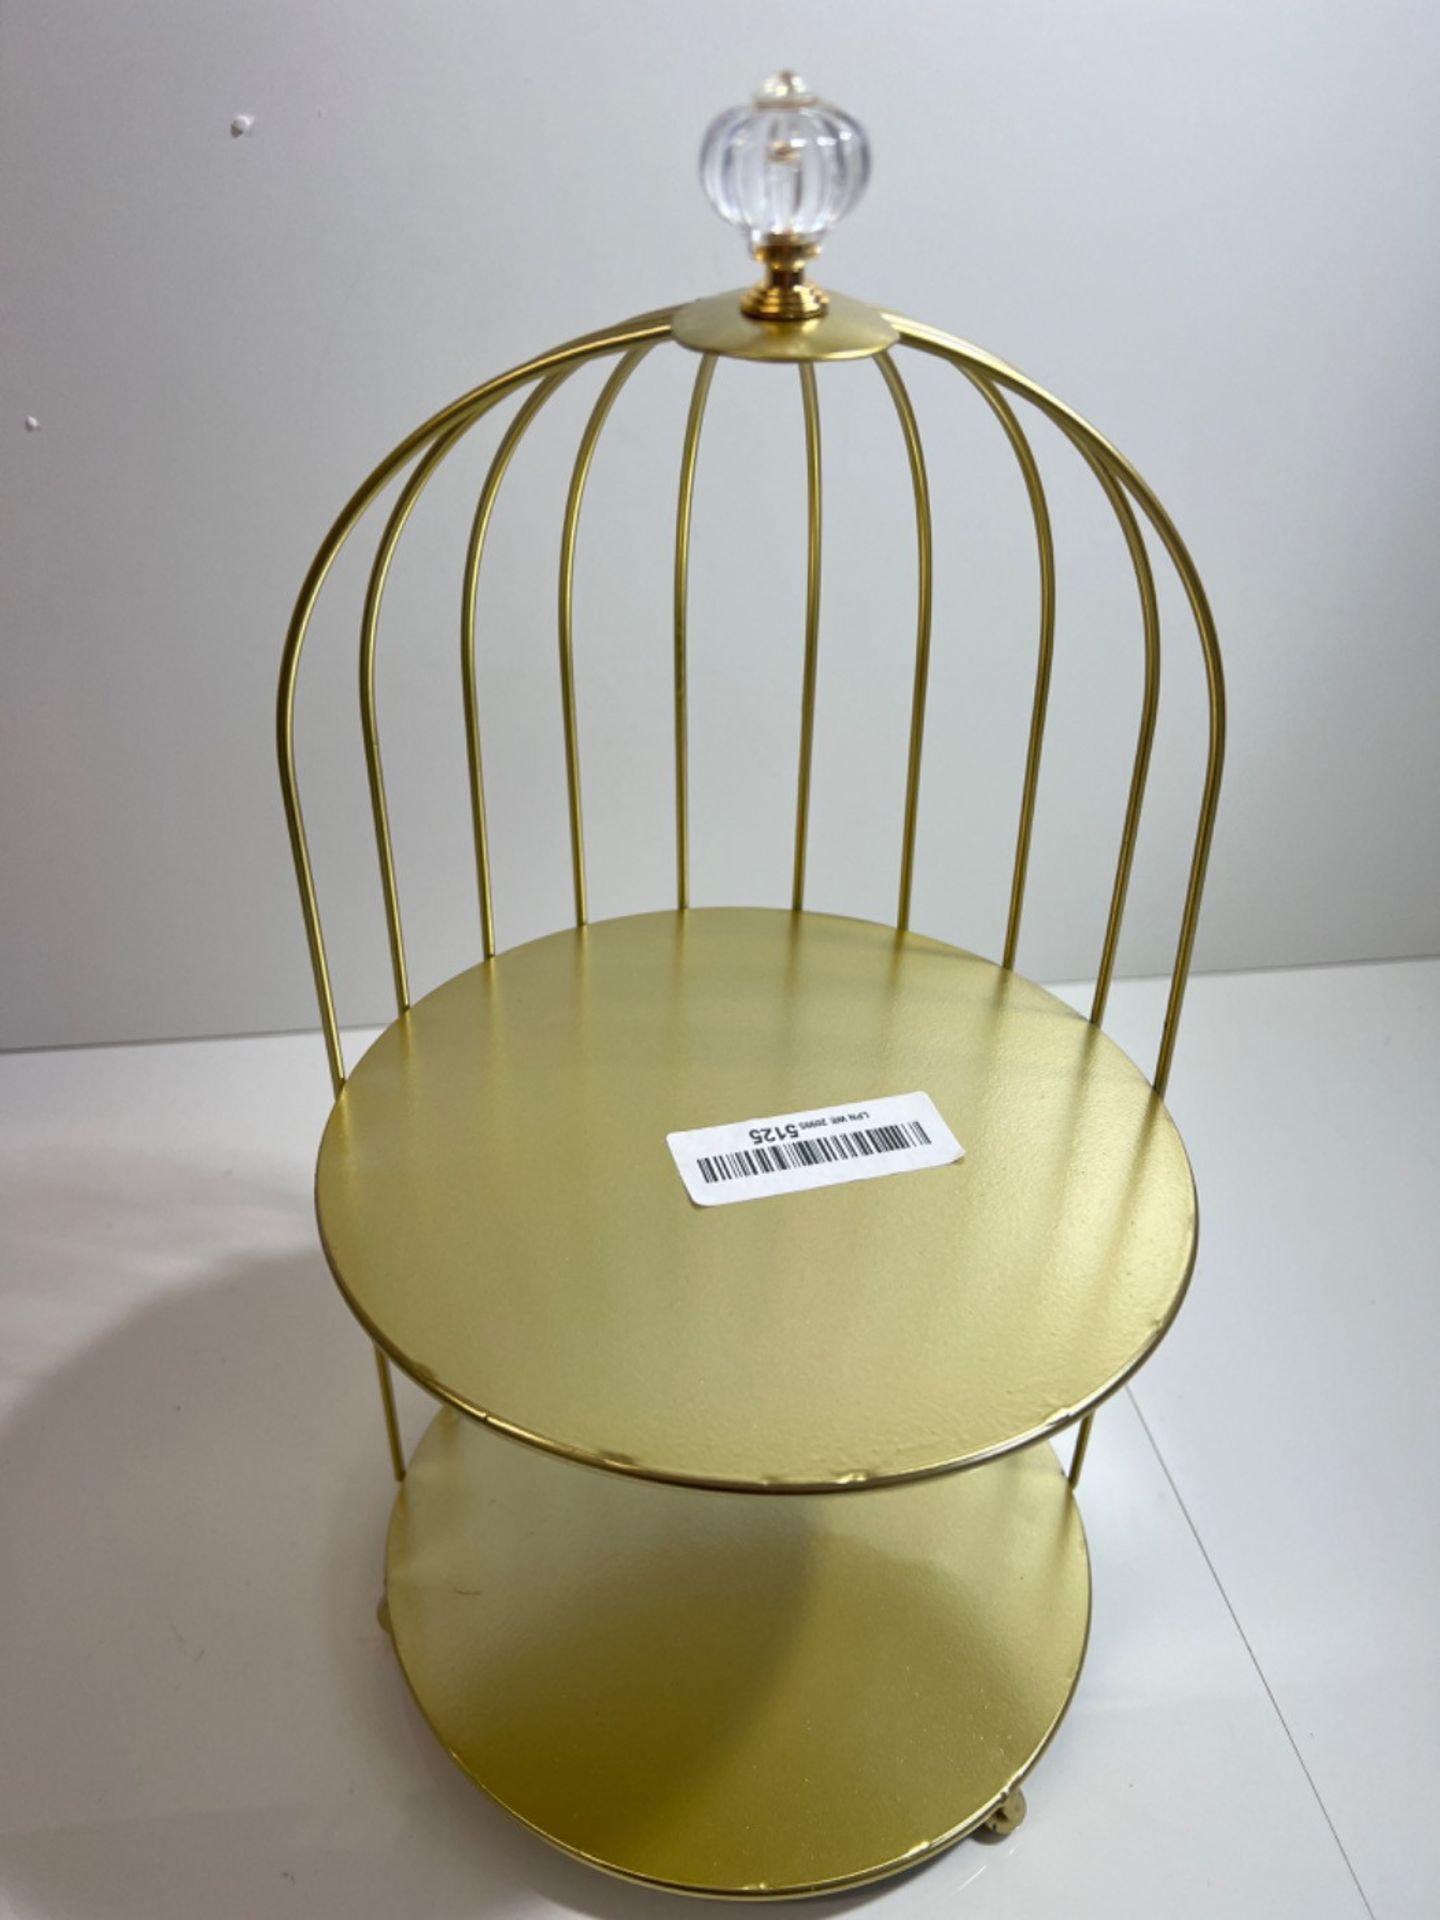 DOITOOL Metal Cupcake Stand 2- Tier Gold Cake Stands with Bird Cage Shaped for Party Dessert Fruits - Image 3 of 3